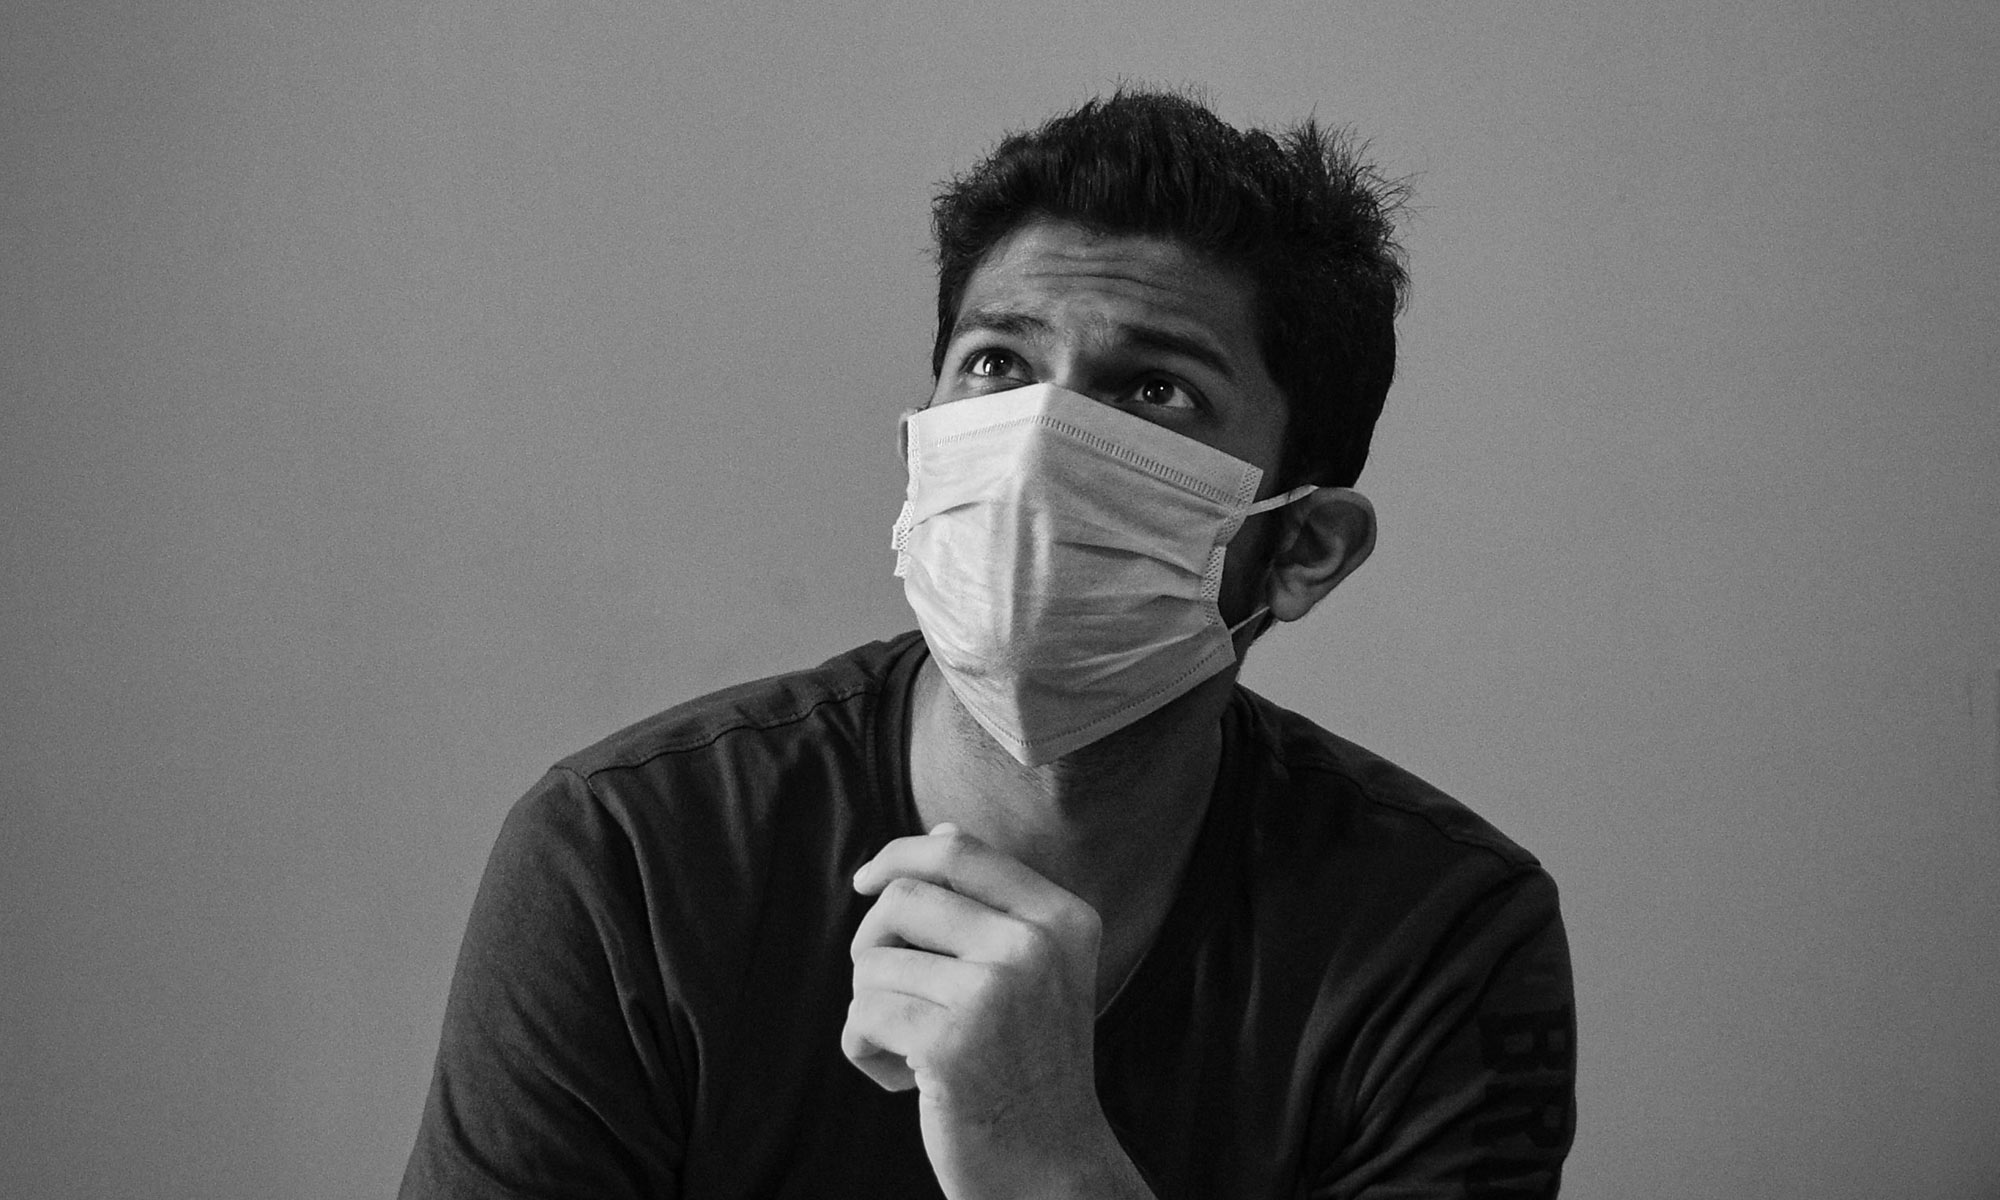 person wearing a protective face-mask looking into the distance